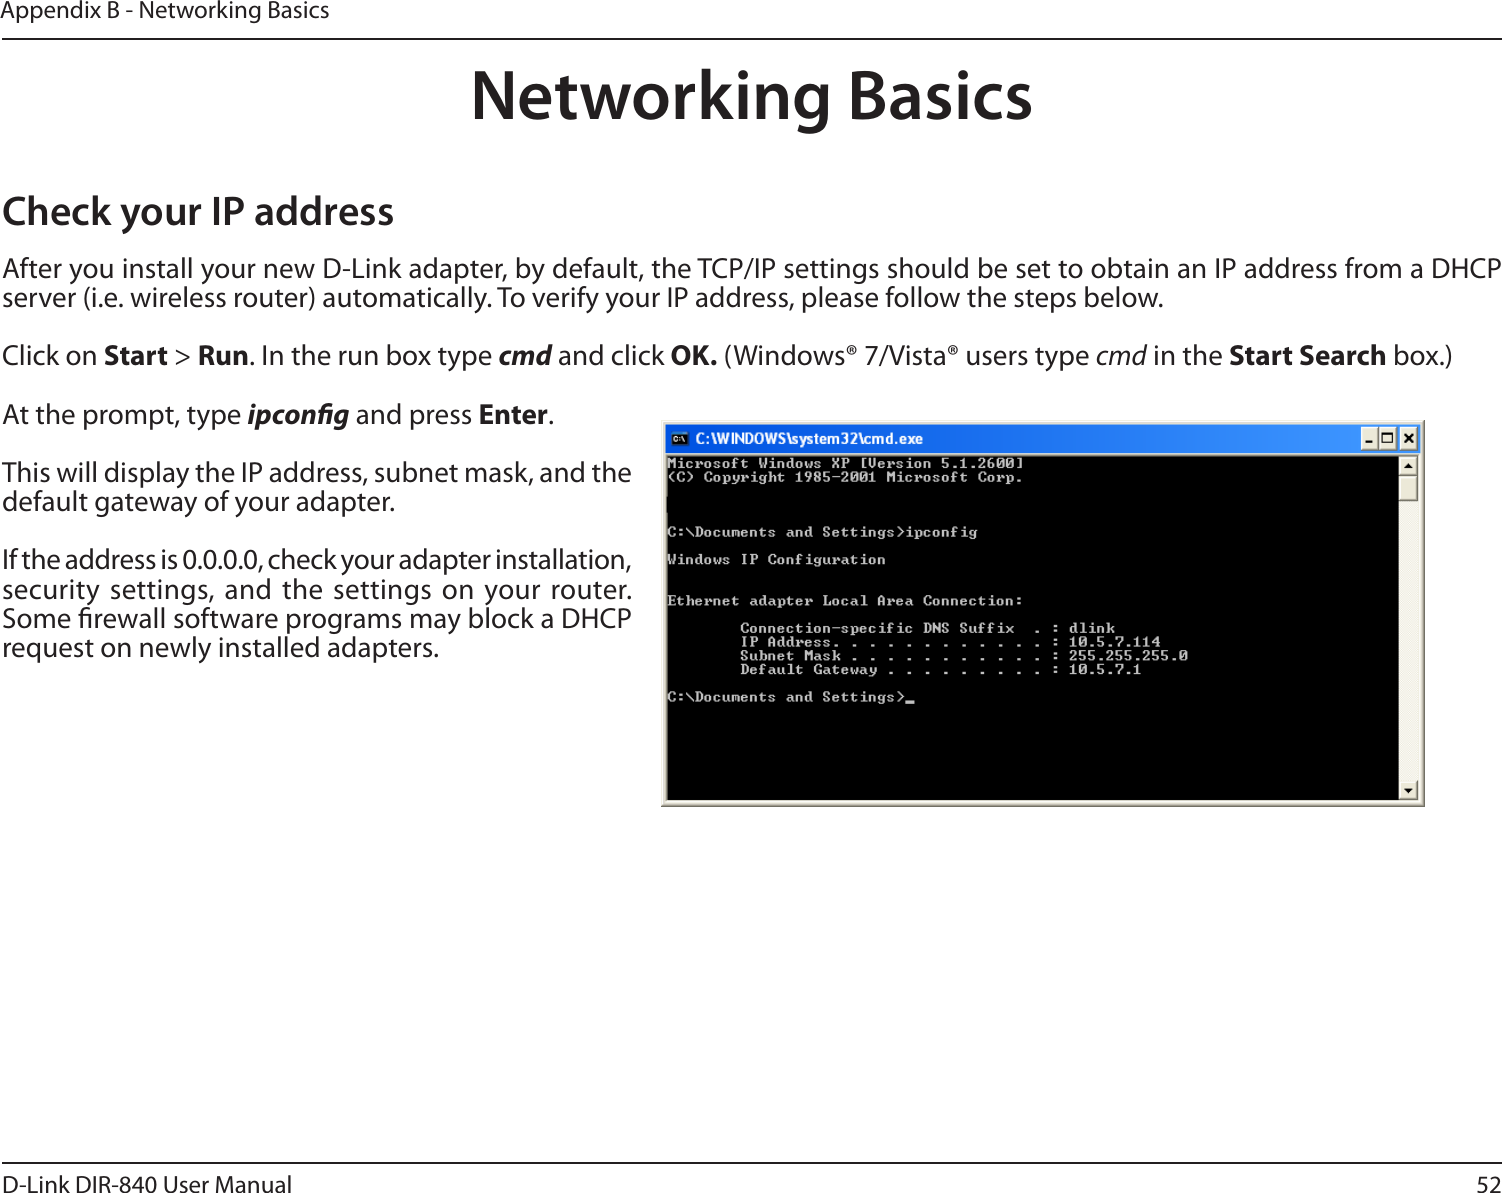 52D-Link DIR-840 User ManualAppendix B - Networking BasicsNetworking BasicsCheck your IP addressAfter you install your new D-Link adapter, by default, the TCP/IP settings should be set to obtain an IP address from a DHCP server (i.e. wireless router) automatically. To verify your IP address, please follow the steps below.Click on Start &gt; Run. In the run box type cmd and click OK. (Windows® 7/Vista® users type cmd in the Start Search box.)At the prompt, type ipcong and press Enter.This will display the IP address, subnet mask, and the default gateway of your adapter.If the address is 0.0.0.0, check your adapter installation, security  settings, and  the settings on  your router. Some rewall software programs may block a DHCP request on newly installed adapters. 